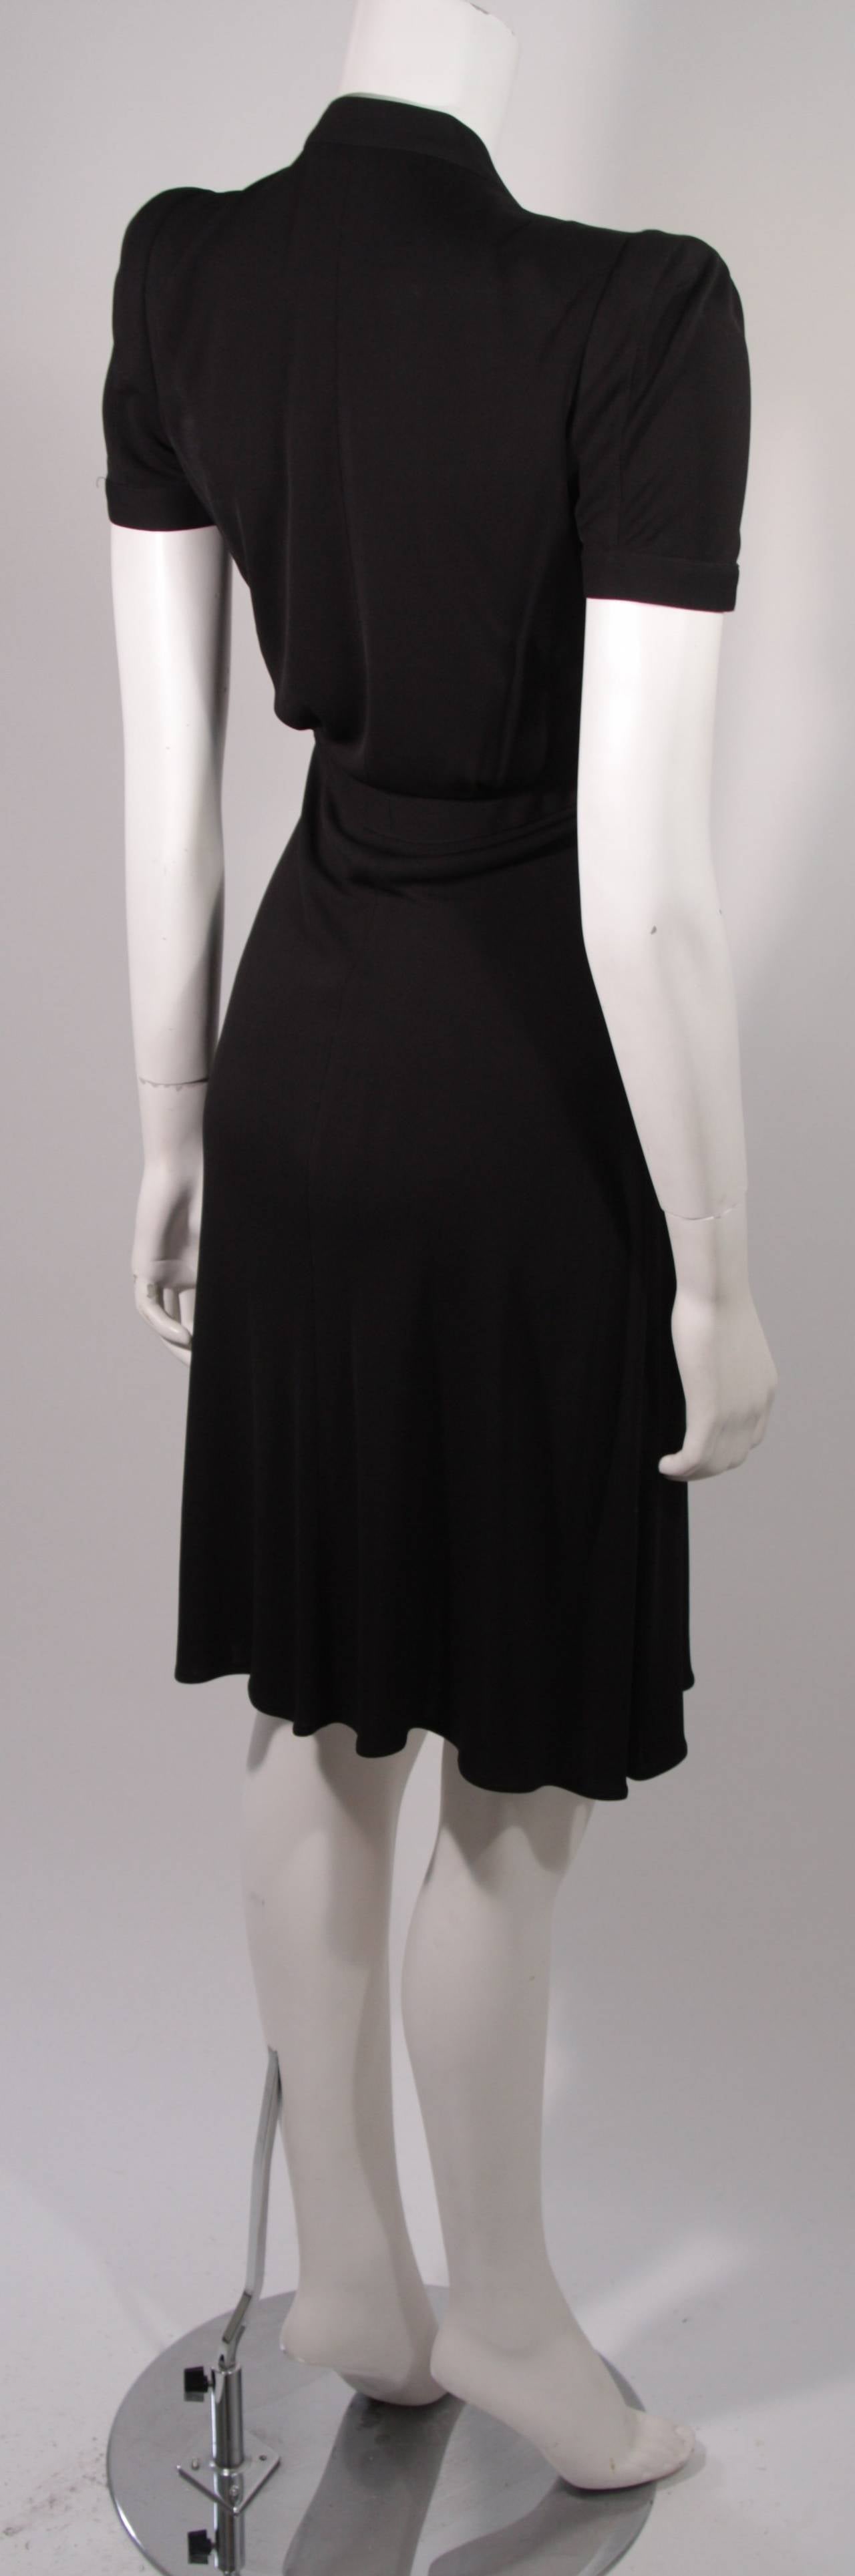 Lagerfield Black Jersey Dress and Jacket Ensemble Size 36 For Sale 4